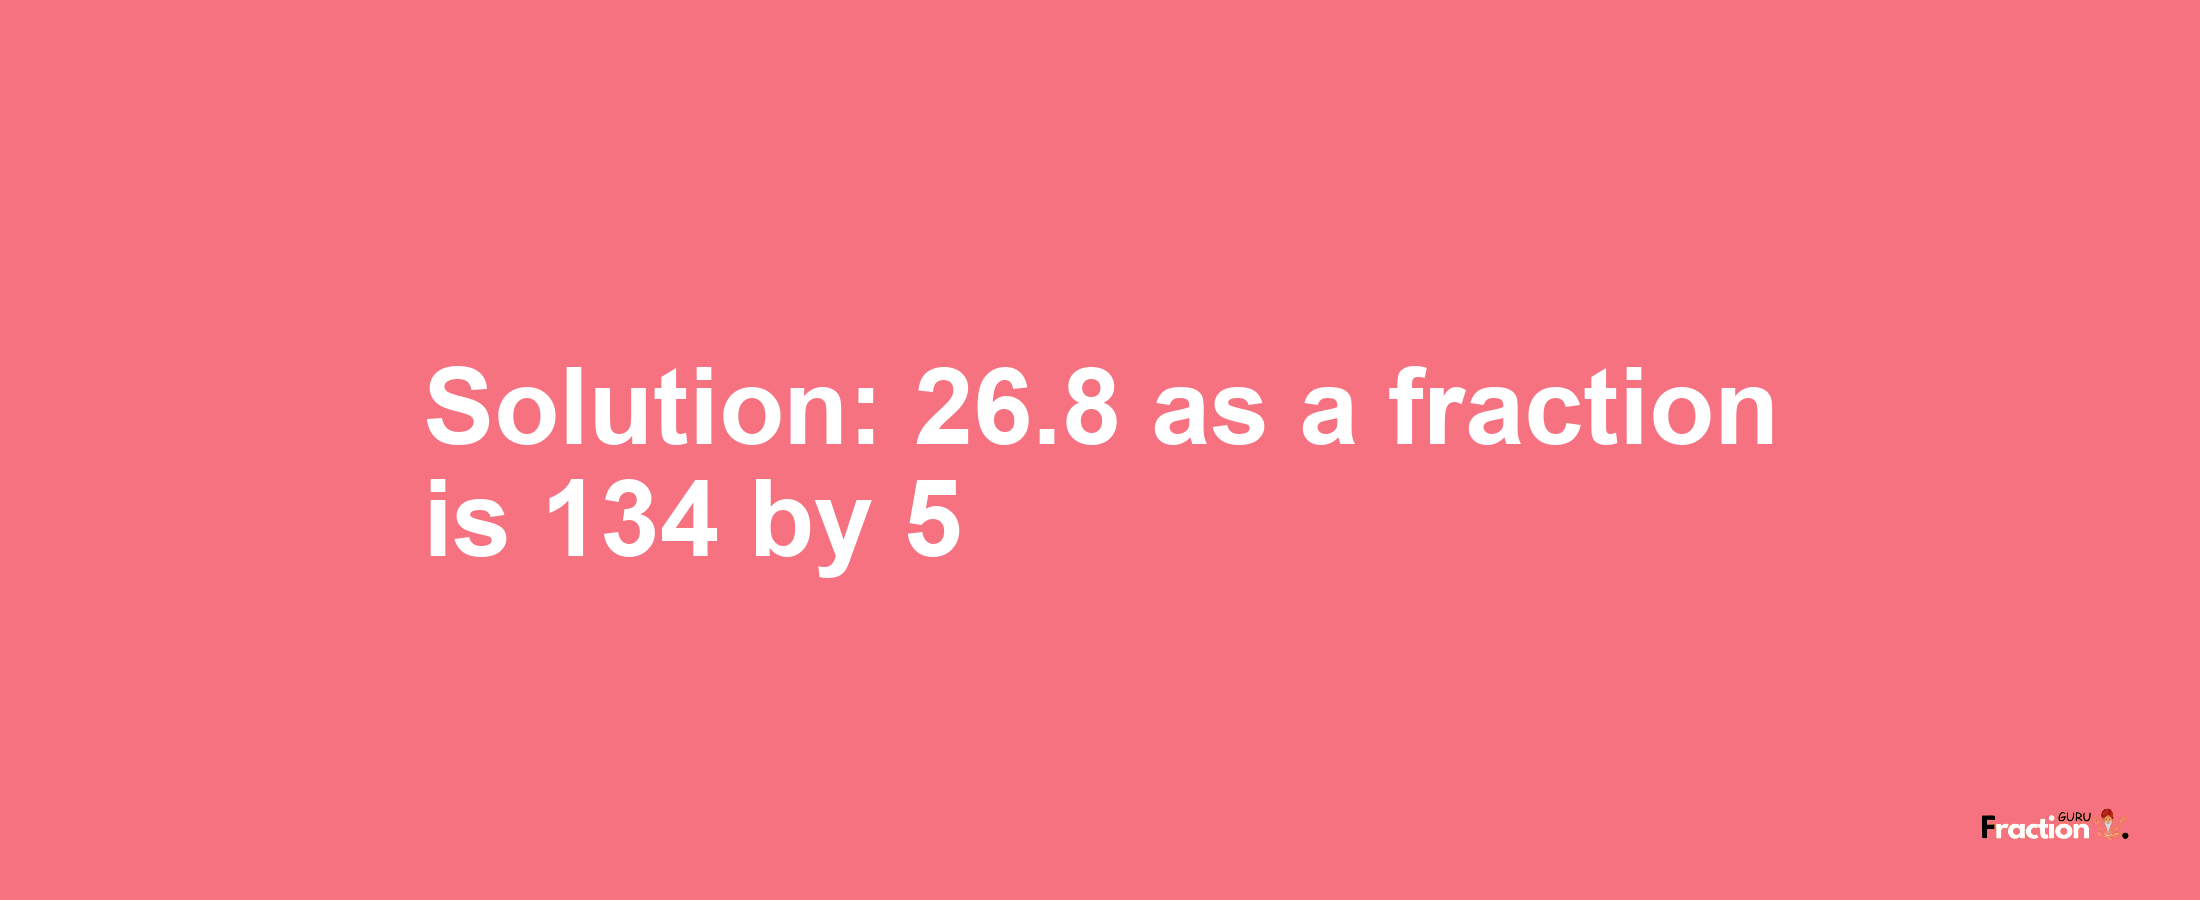 Solution:26.8 as a fraction is 134/5